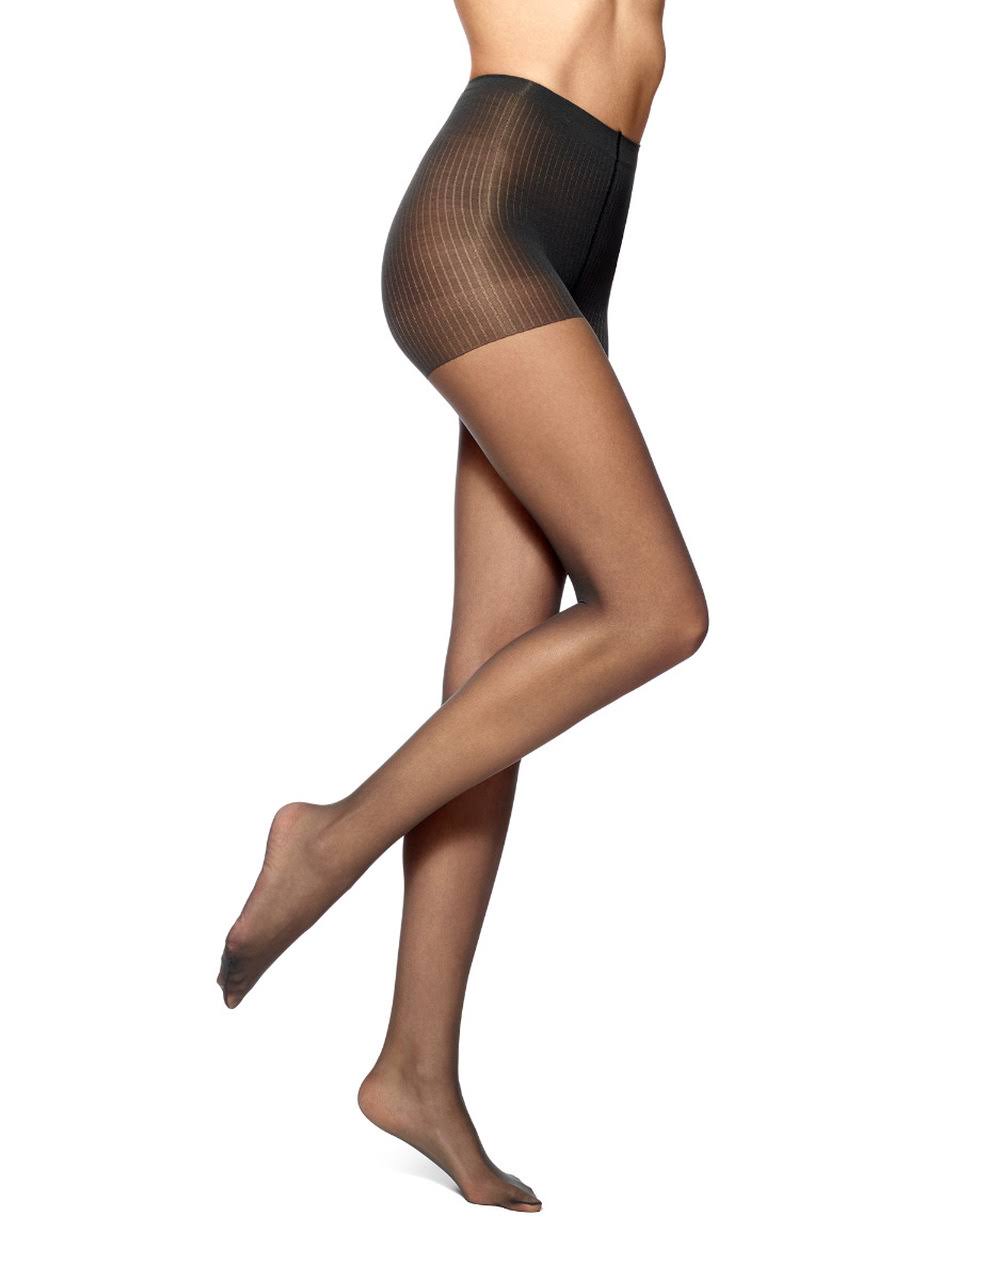 No Nonsense Women's Control Top with Sheer Toe Pantyhose - Off Black, Size Plus